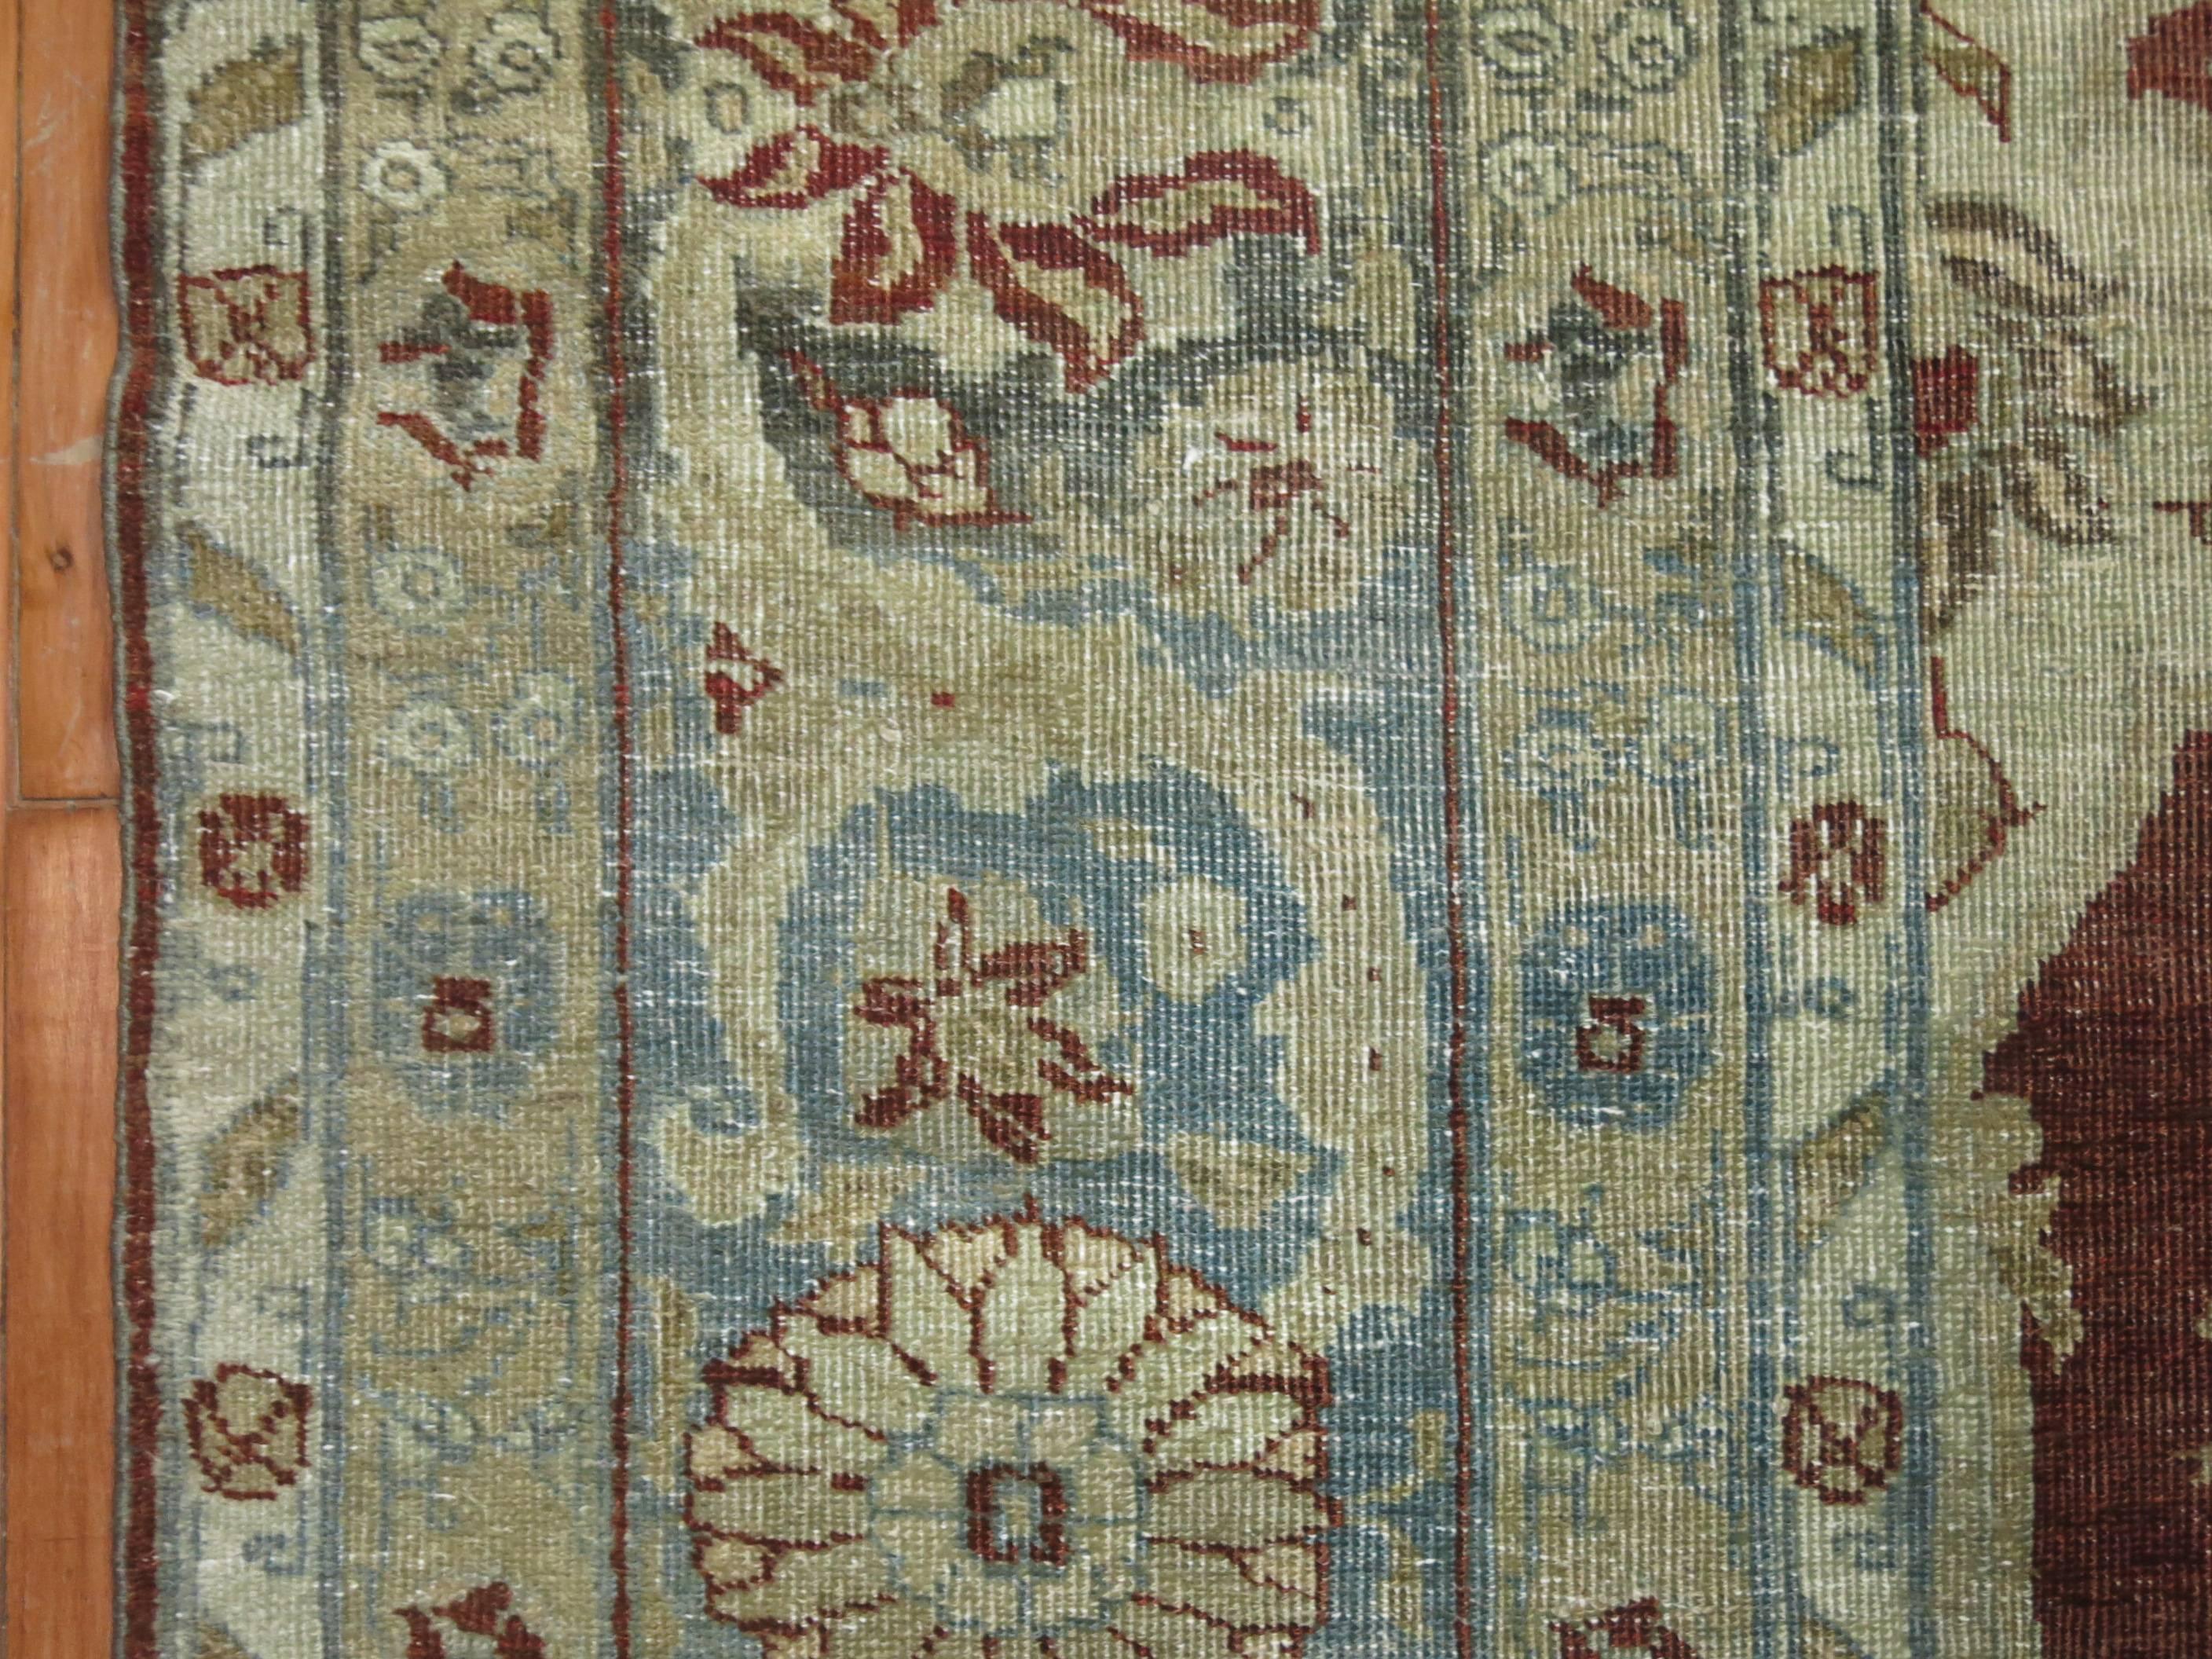 Antique Persian Tabriz rug with a burgundy field, predominant accents in icy blue and gray found in the medallion, field and border. 

7'2'' x 9'7'' circa 1930